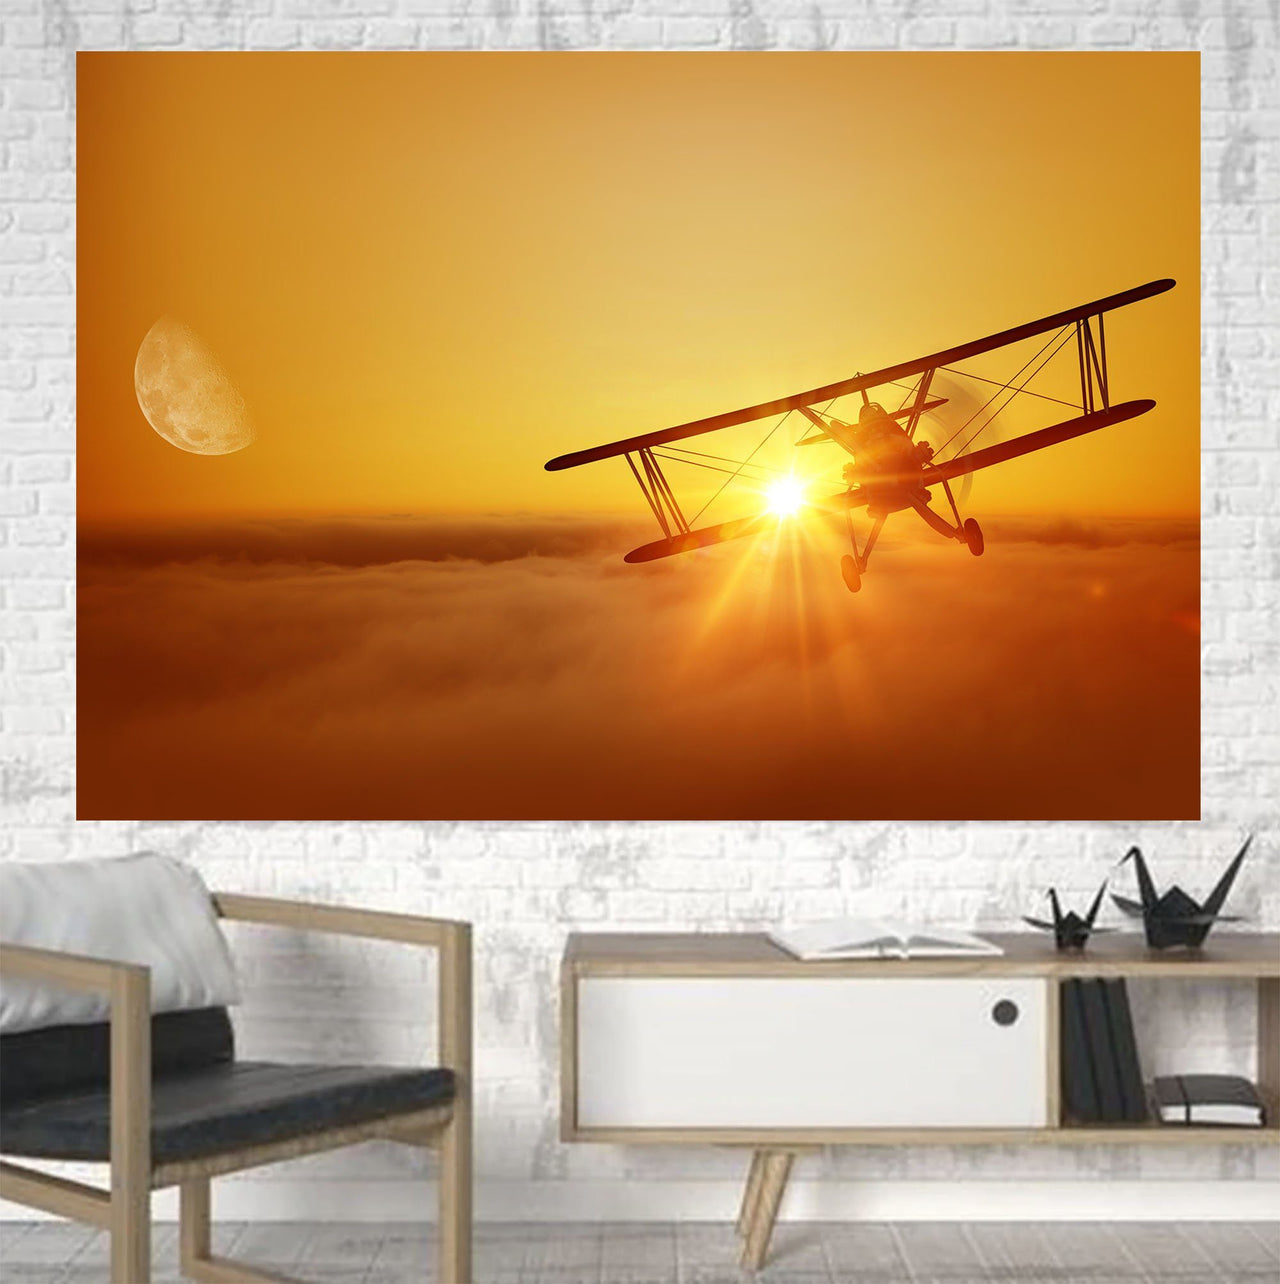 Flying is an Adventure Printed Canvas Posters (1 Piece) Aviation Shop 